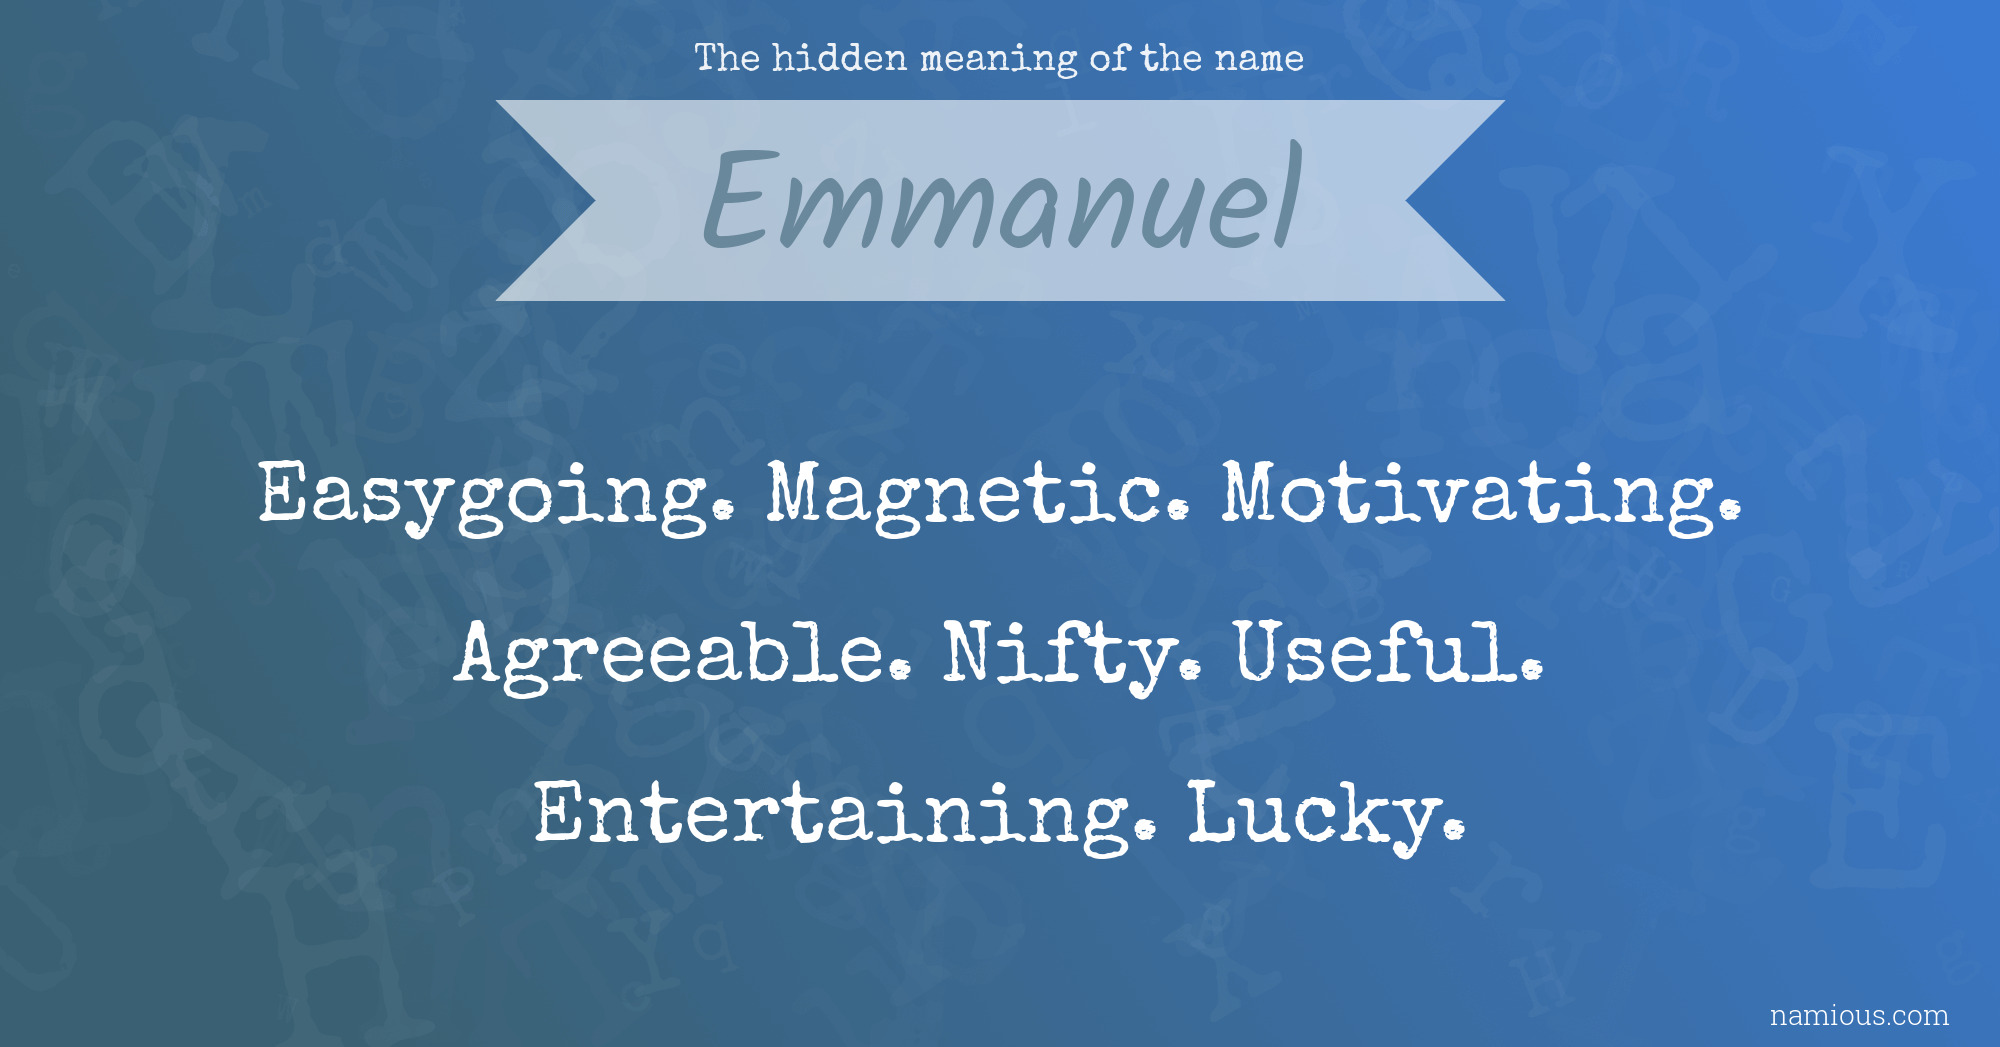 The hidden meaning of the name Emmanuel